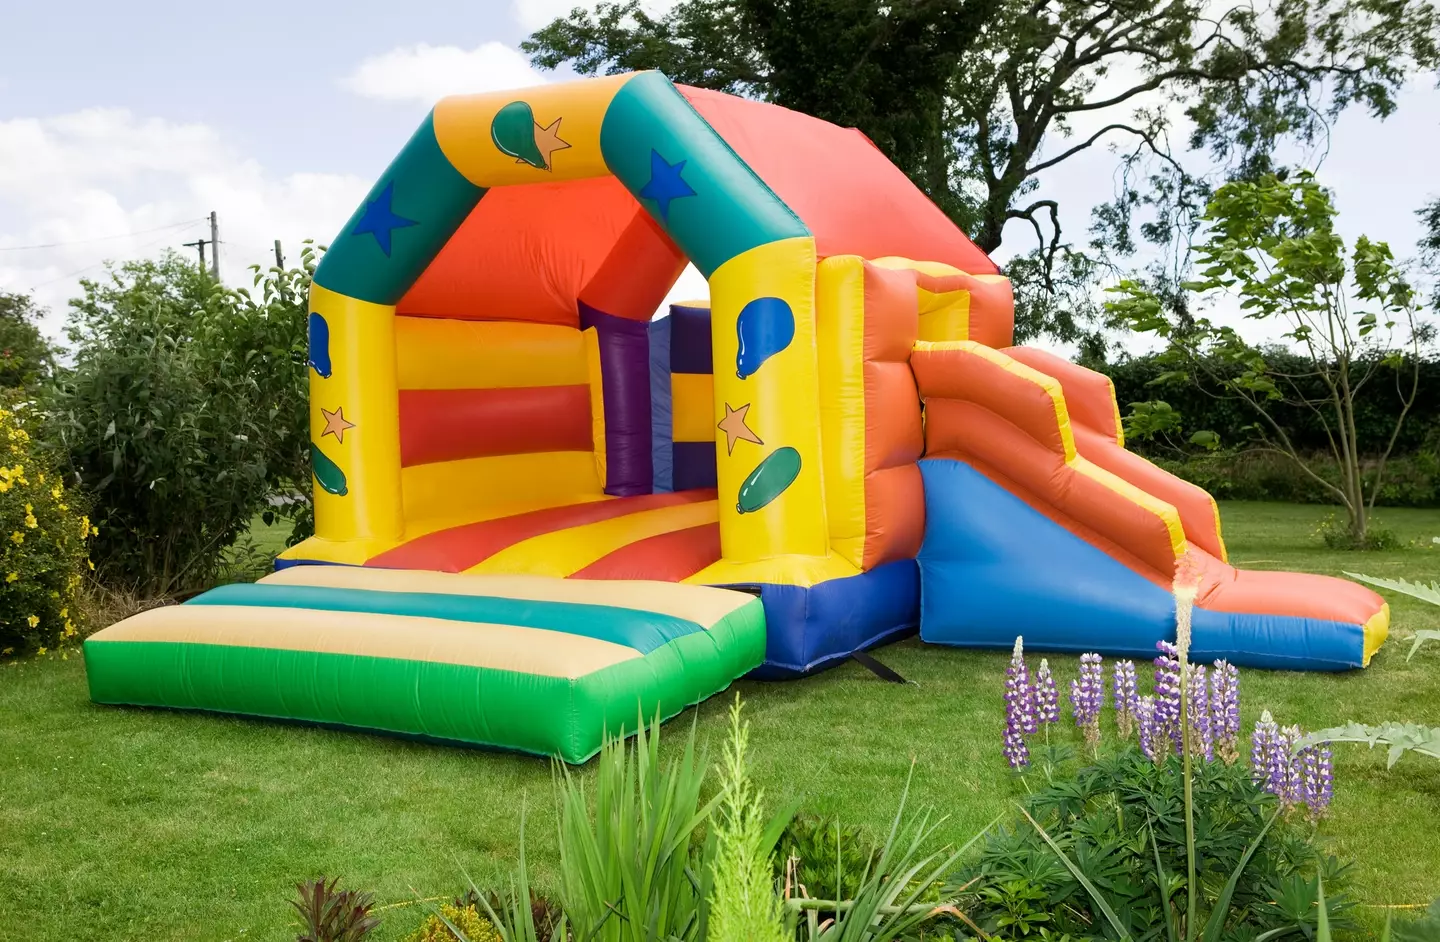 Several children were playing on a bouncy castle when the wind blew it off the ground. (MediaProduction/Getty Stock Image)